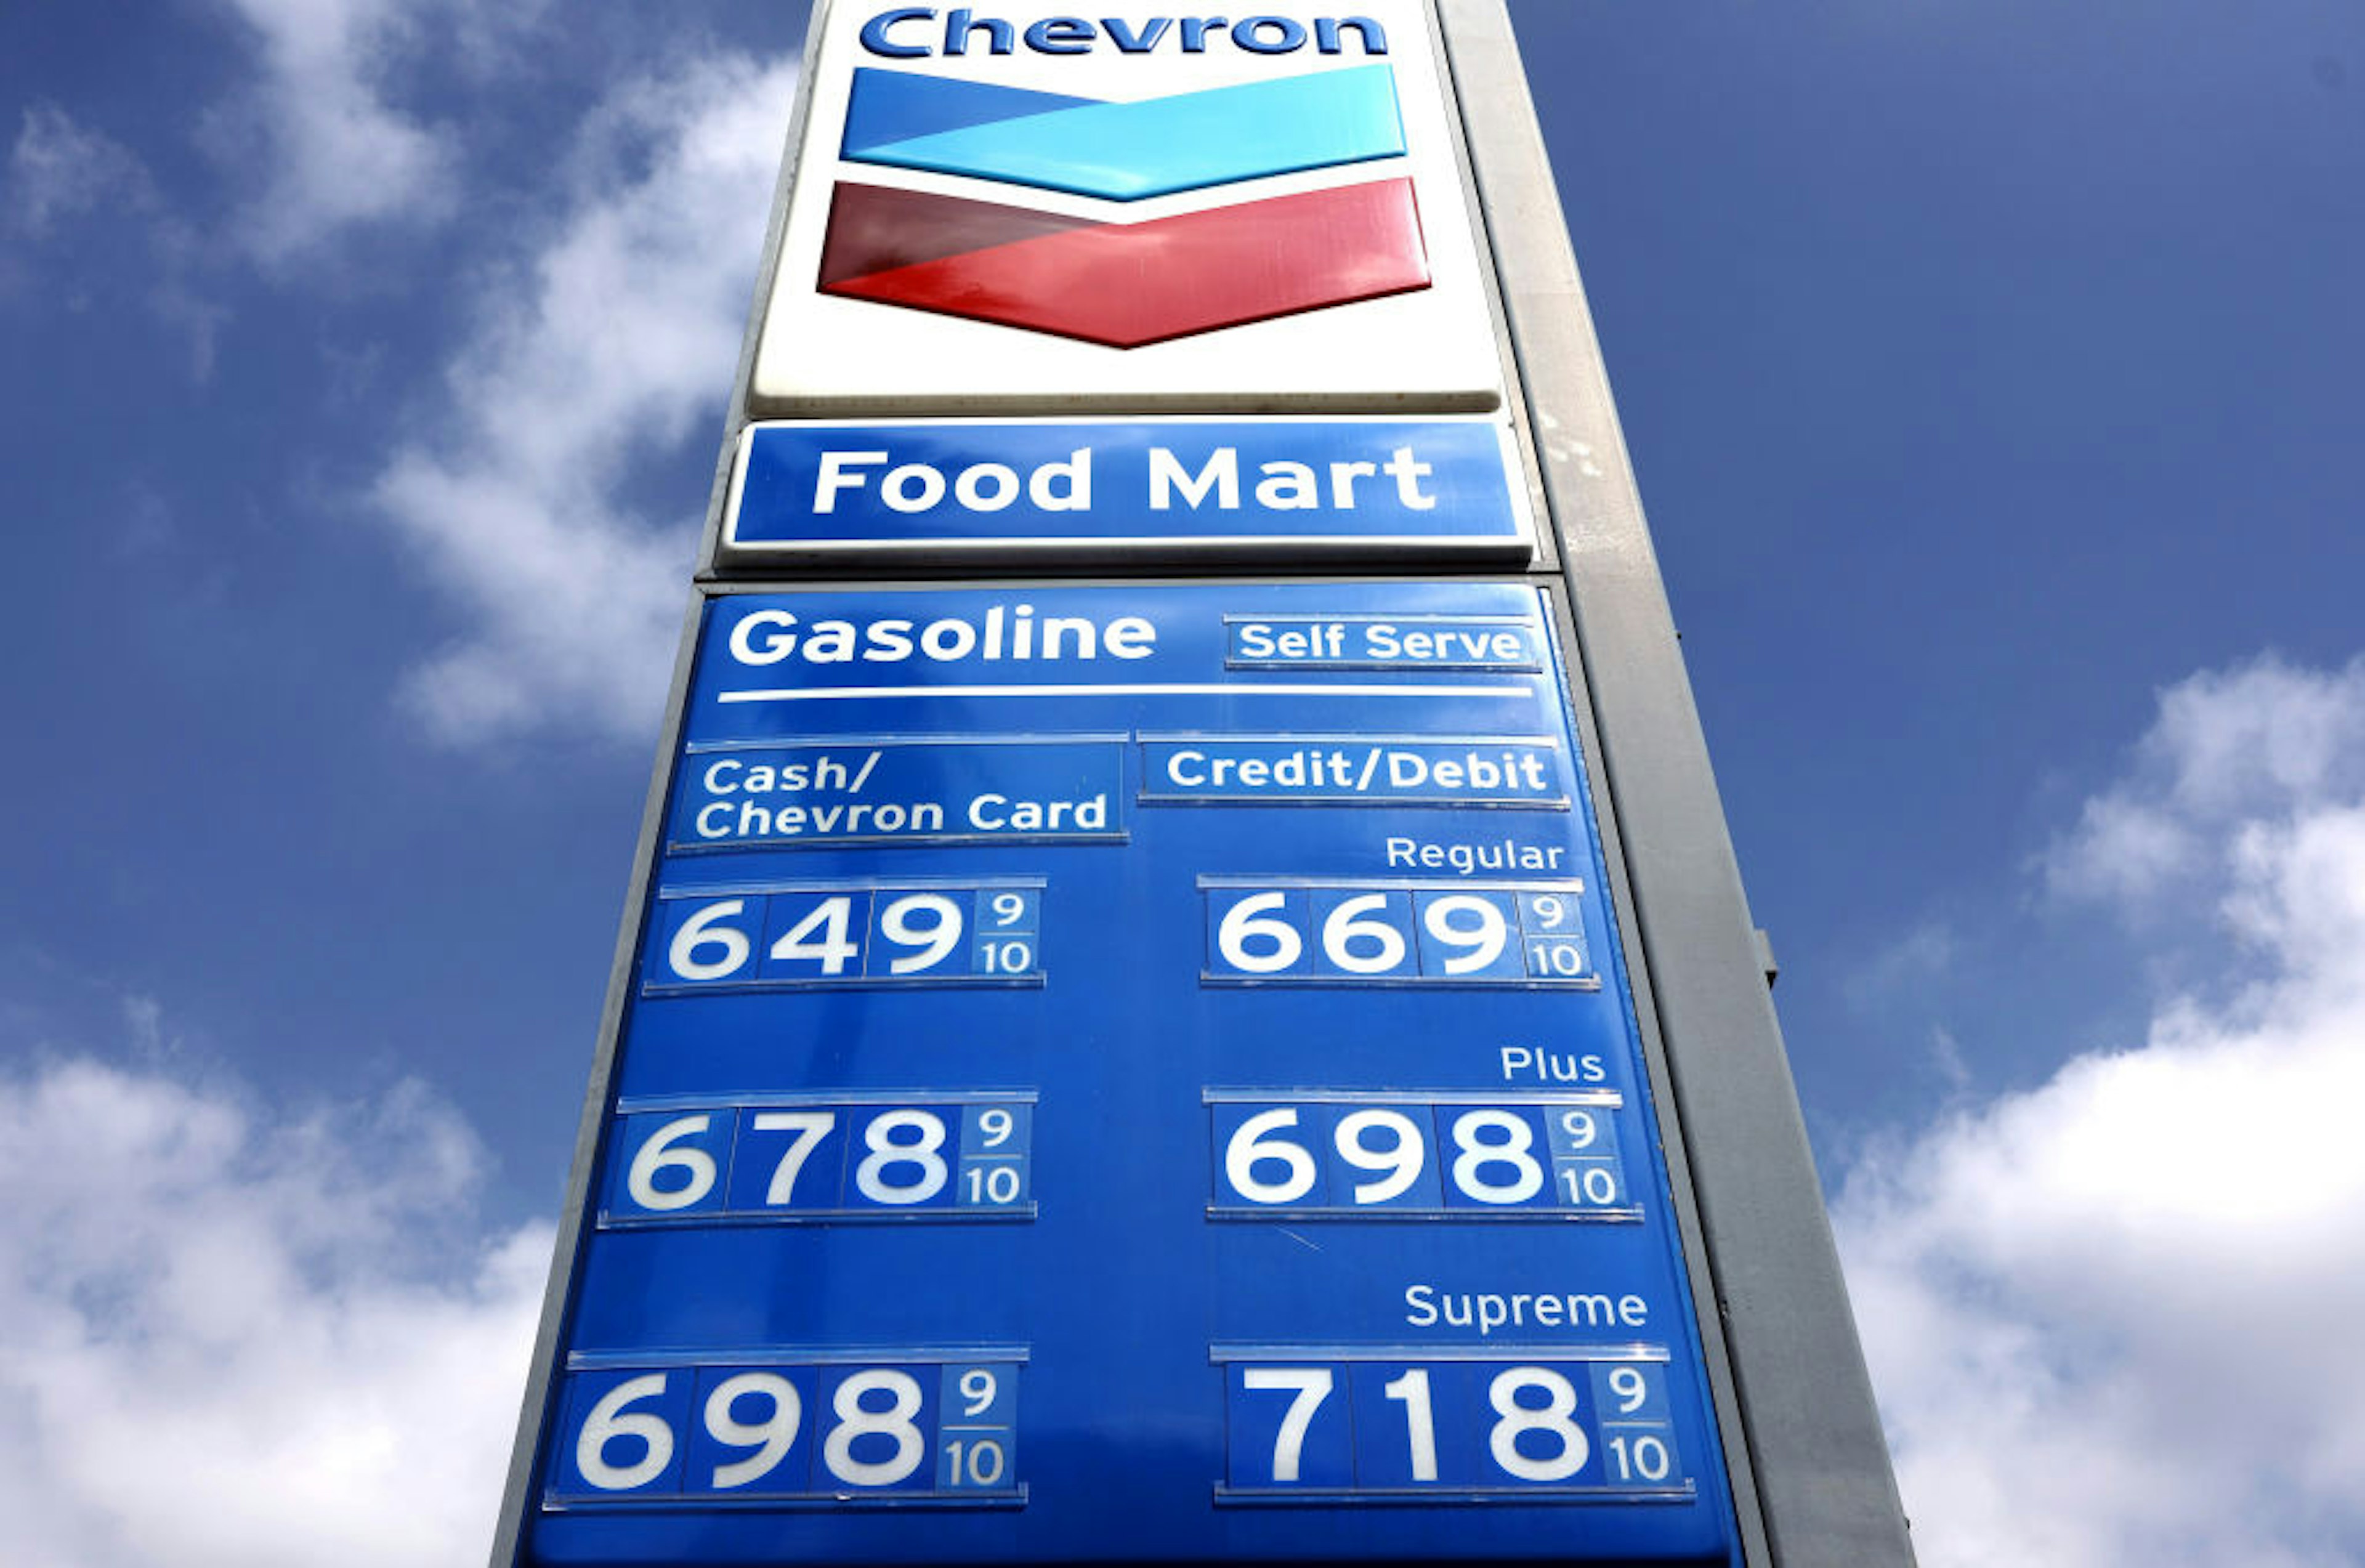 LOS ANGELES, CALIFORNIA - SEPTEMBER 19: Gas prices are displayed at a Chevron station on September 19, 2023 in Los Angeles, California. According to AAA, the average price of one gallon of self-service regular gasoline rose to over $6.00 today in Los Angeles and Orange counties for the first time in nearly a year. (Photo by Mario Tama/Getty Images)